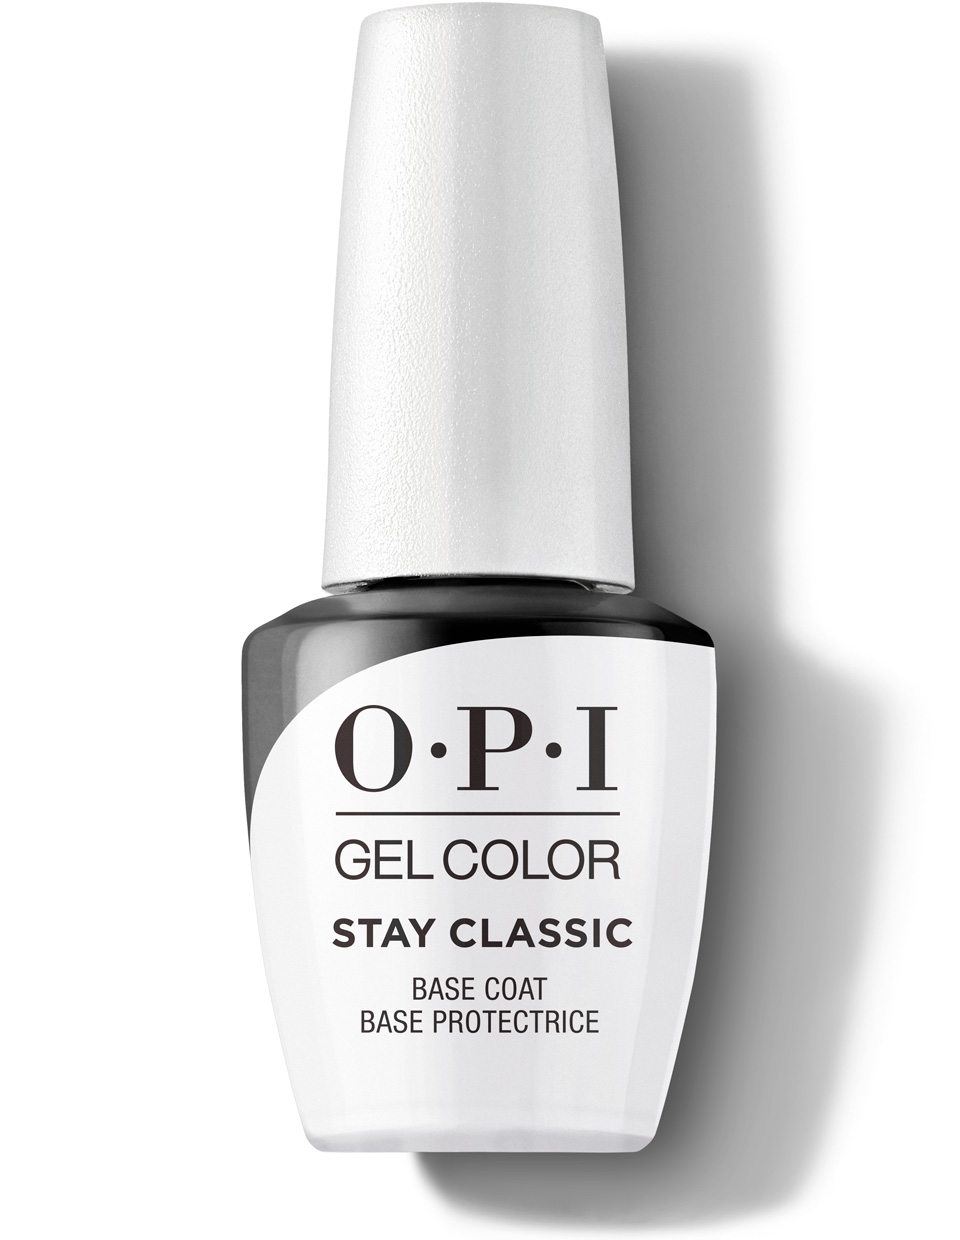 Gel-polish troubleshooting: chipping, shrinkage and more